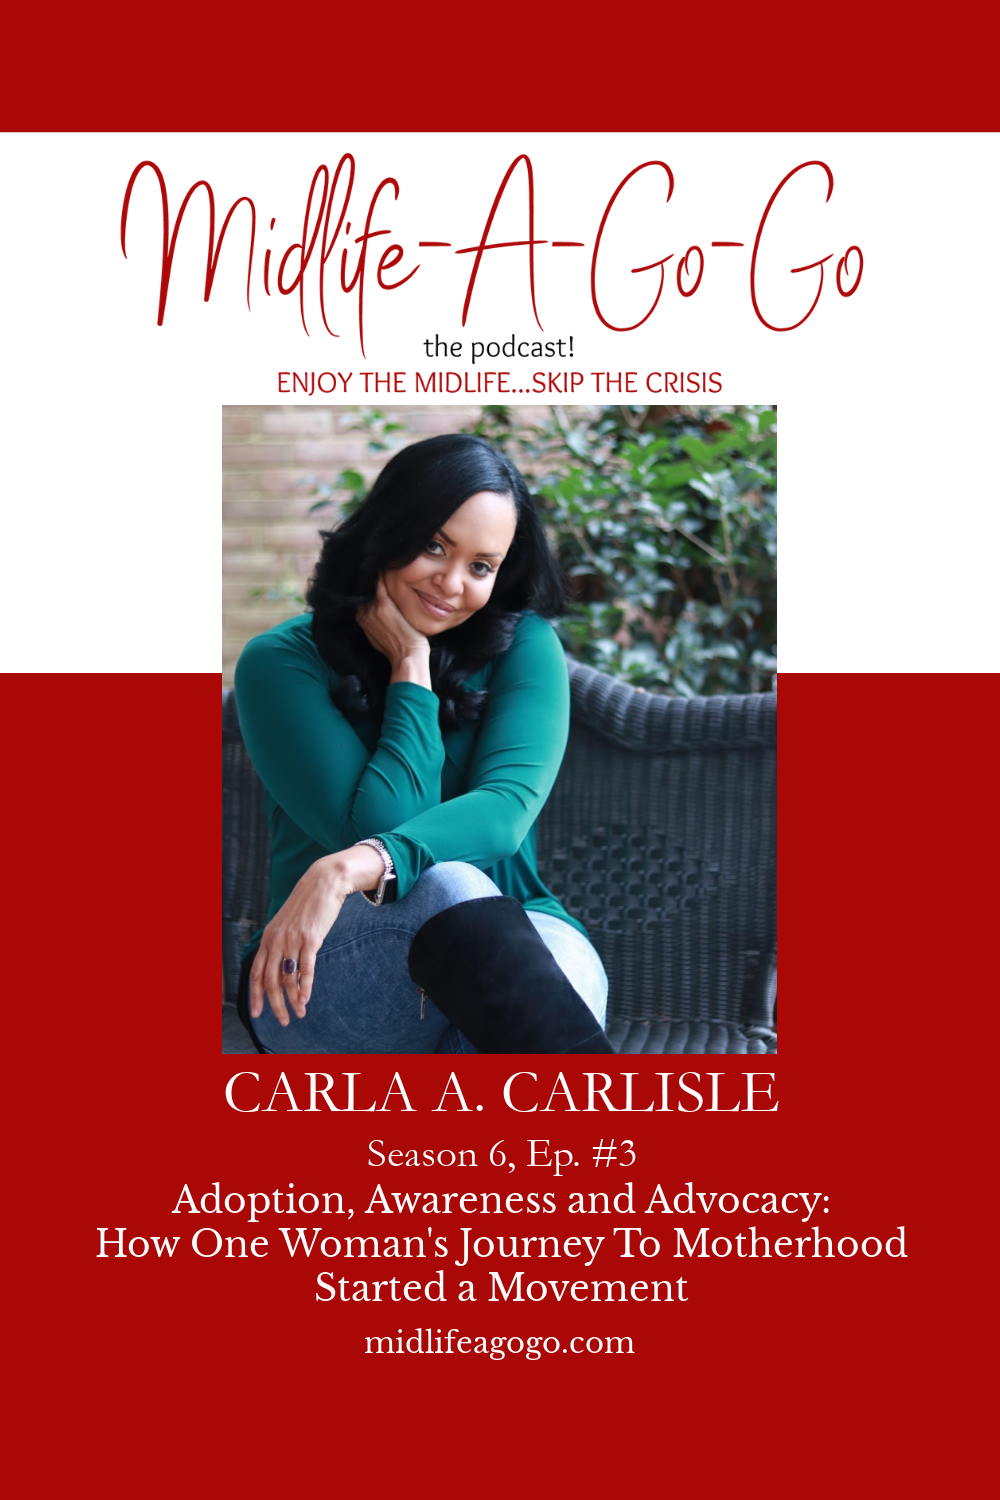 Adoption, Awareness and Advocacy: How One Woman’s Journey To Motherhood Started a Movement with Carla Carlisle